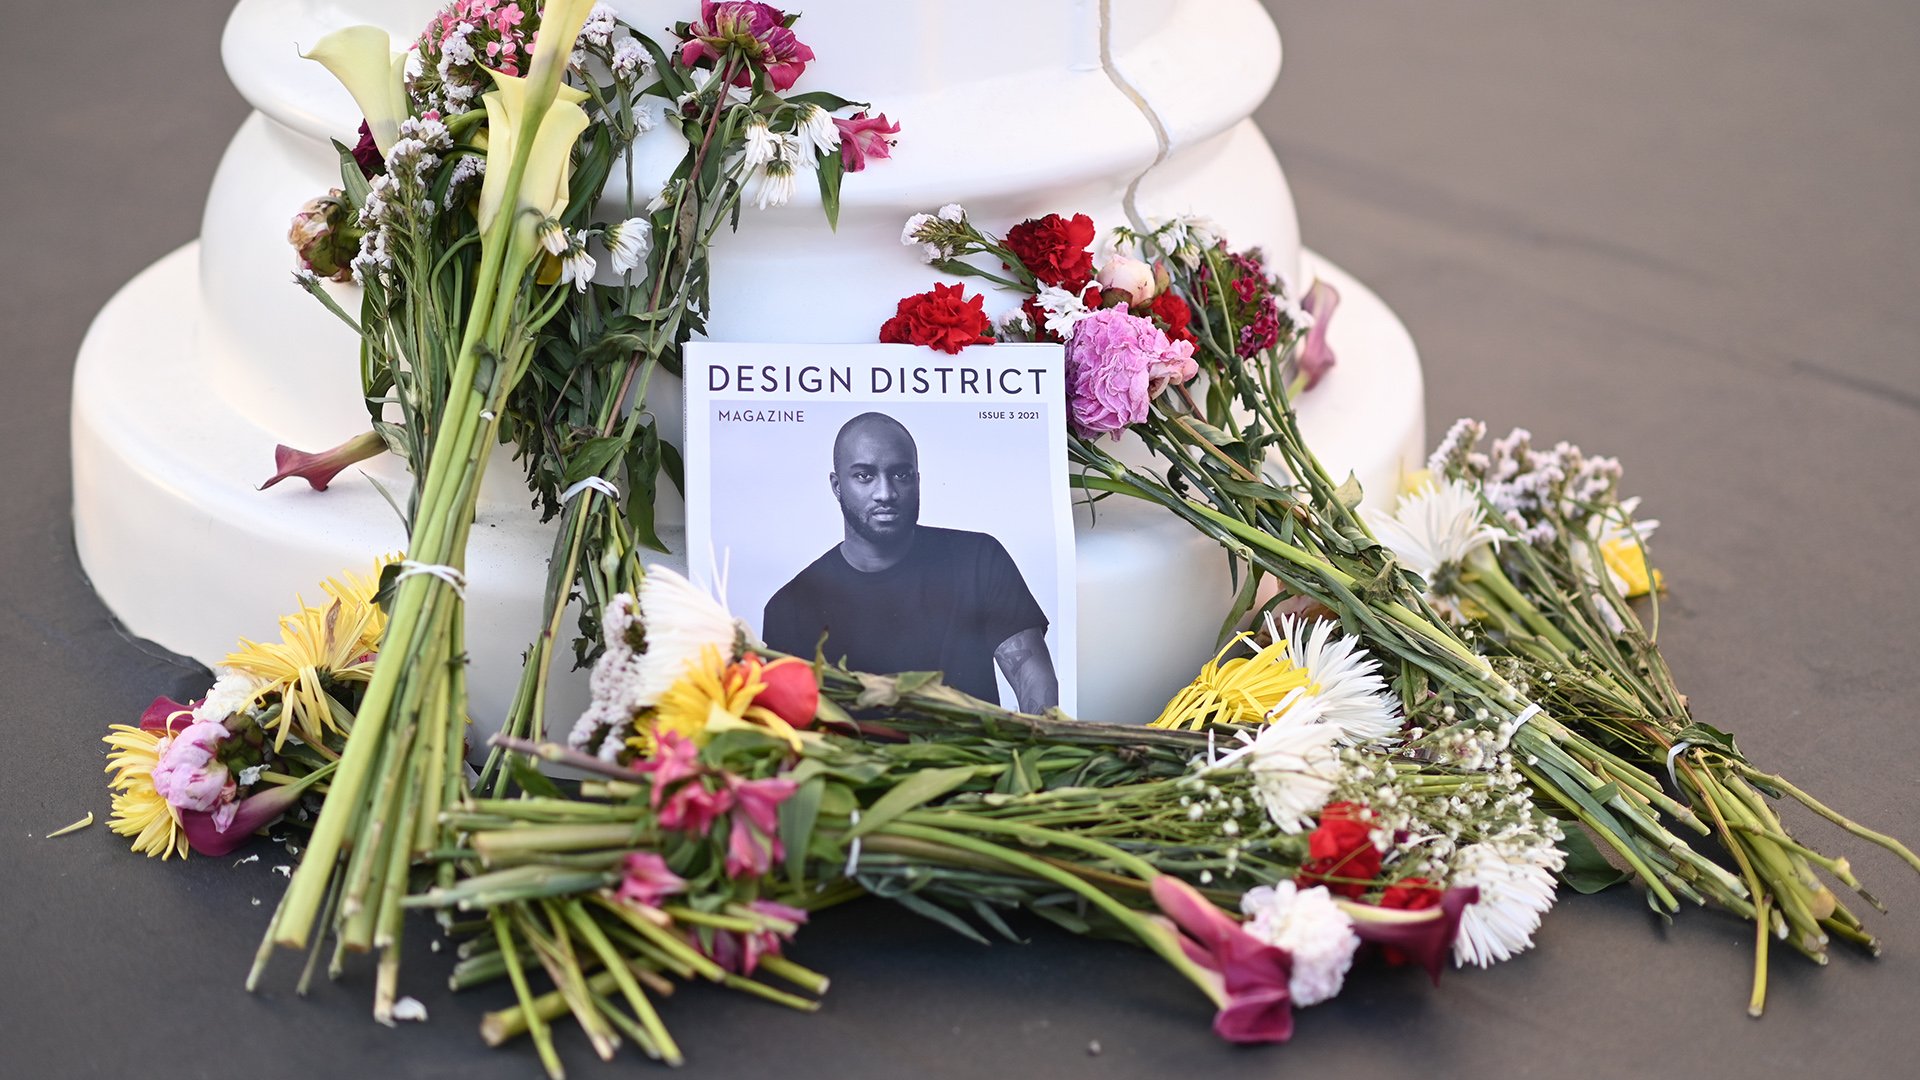 Virgil Abloh Eulogies Pour in From Frank Ocean, Kanye West, Drake, and More  - Okayplayer